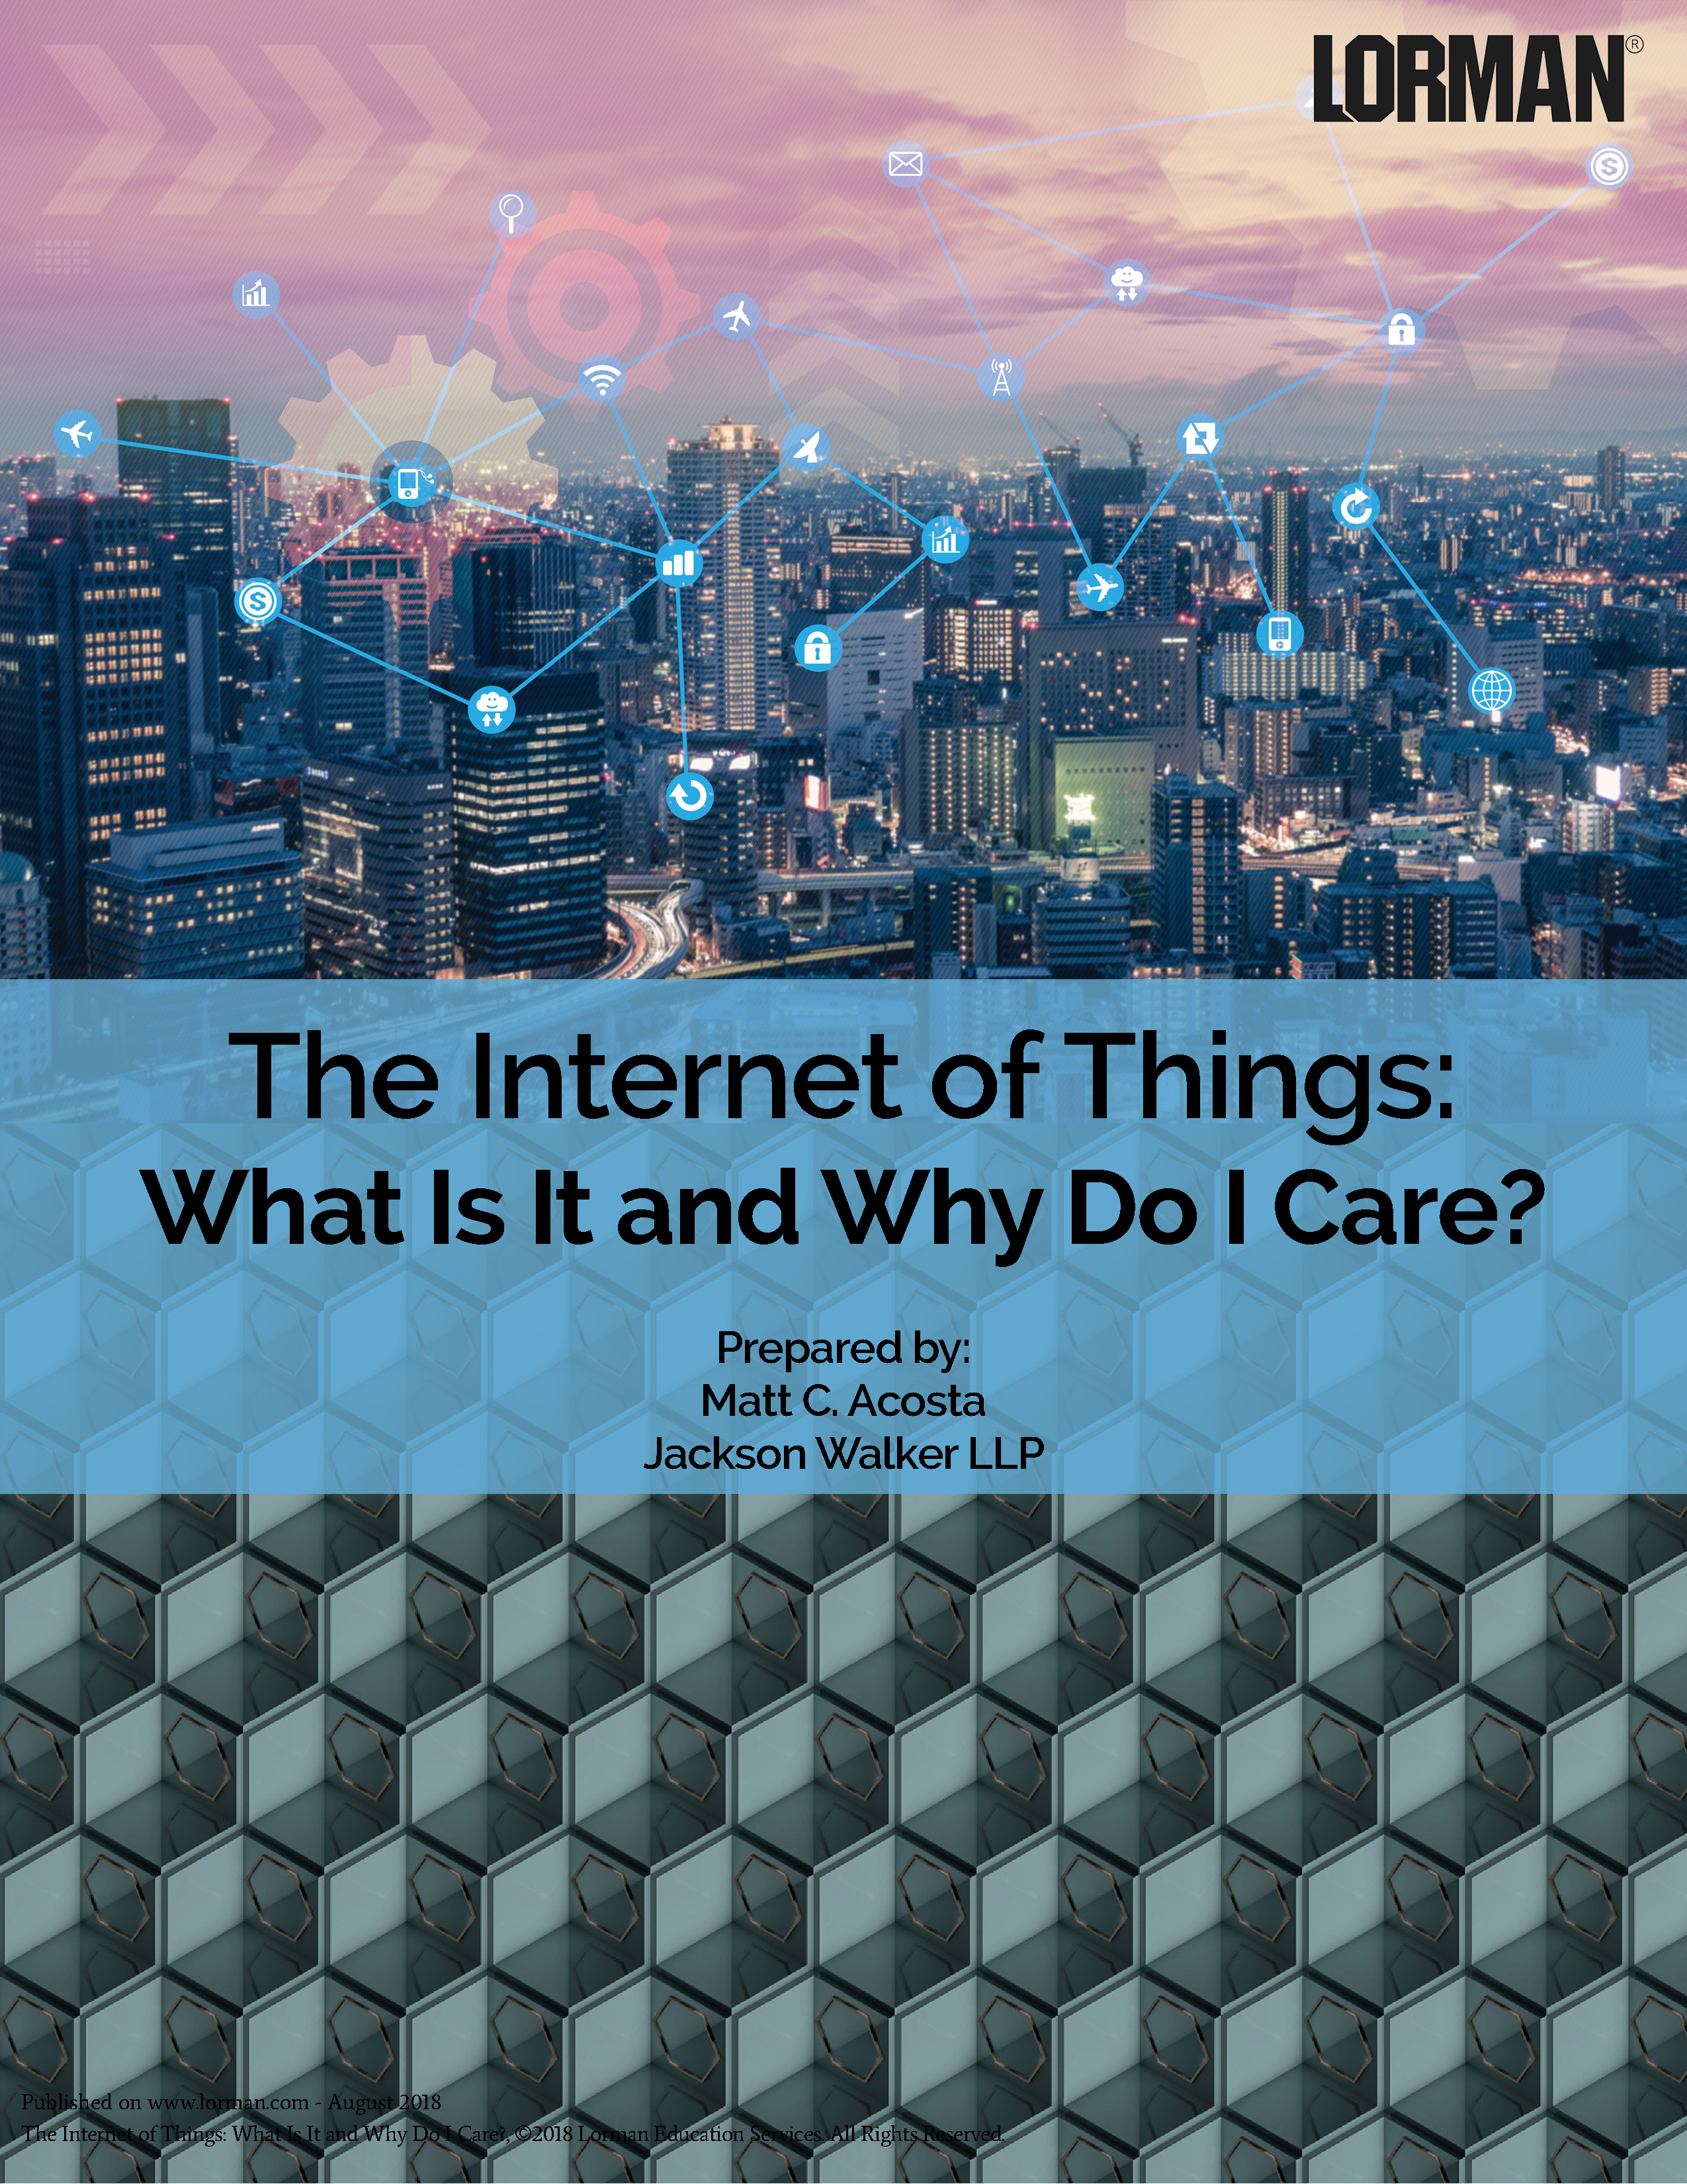 The Internet of Things: What Is It and Why Do I Care?